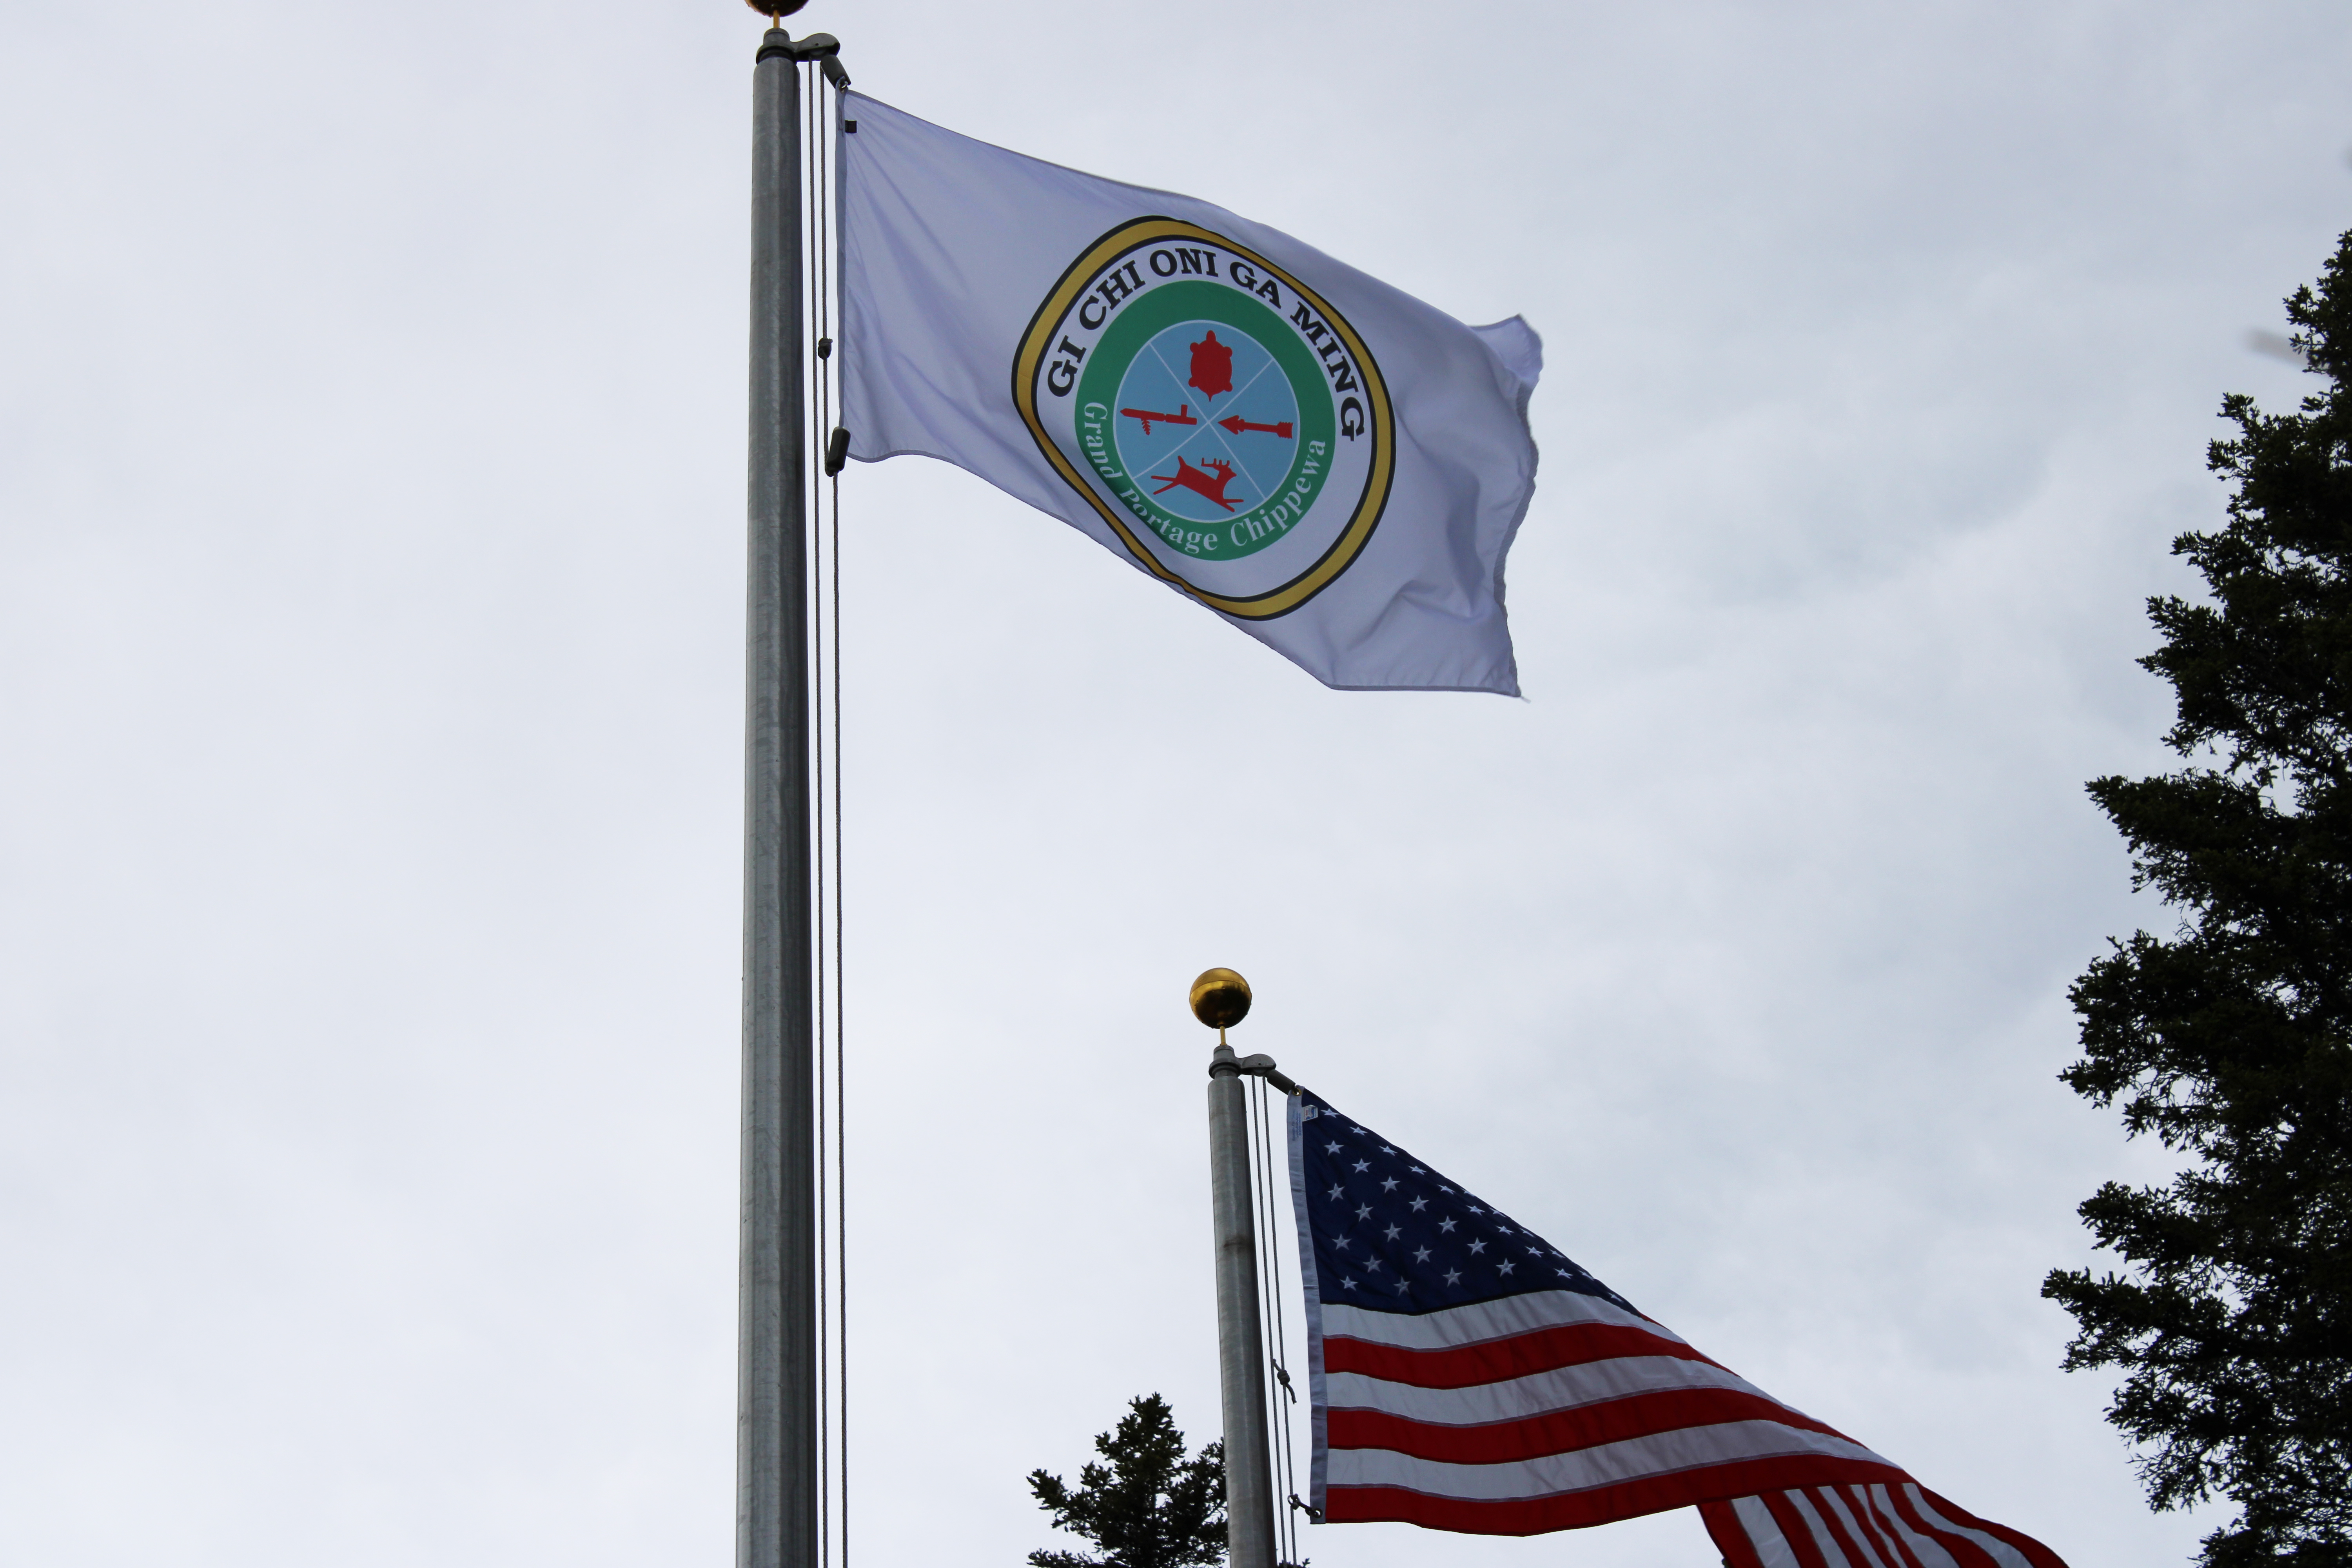 The flag of the Grand Portage Band of Lake Superior Chippewa flies next to the American flag.